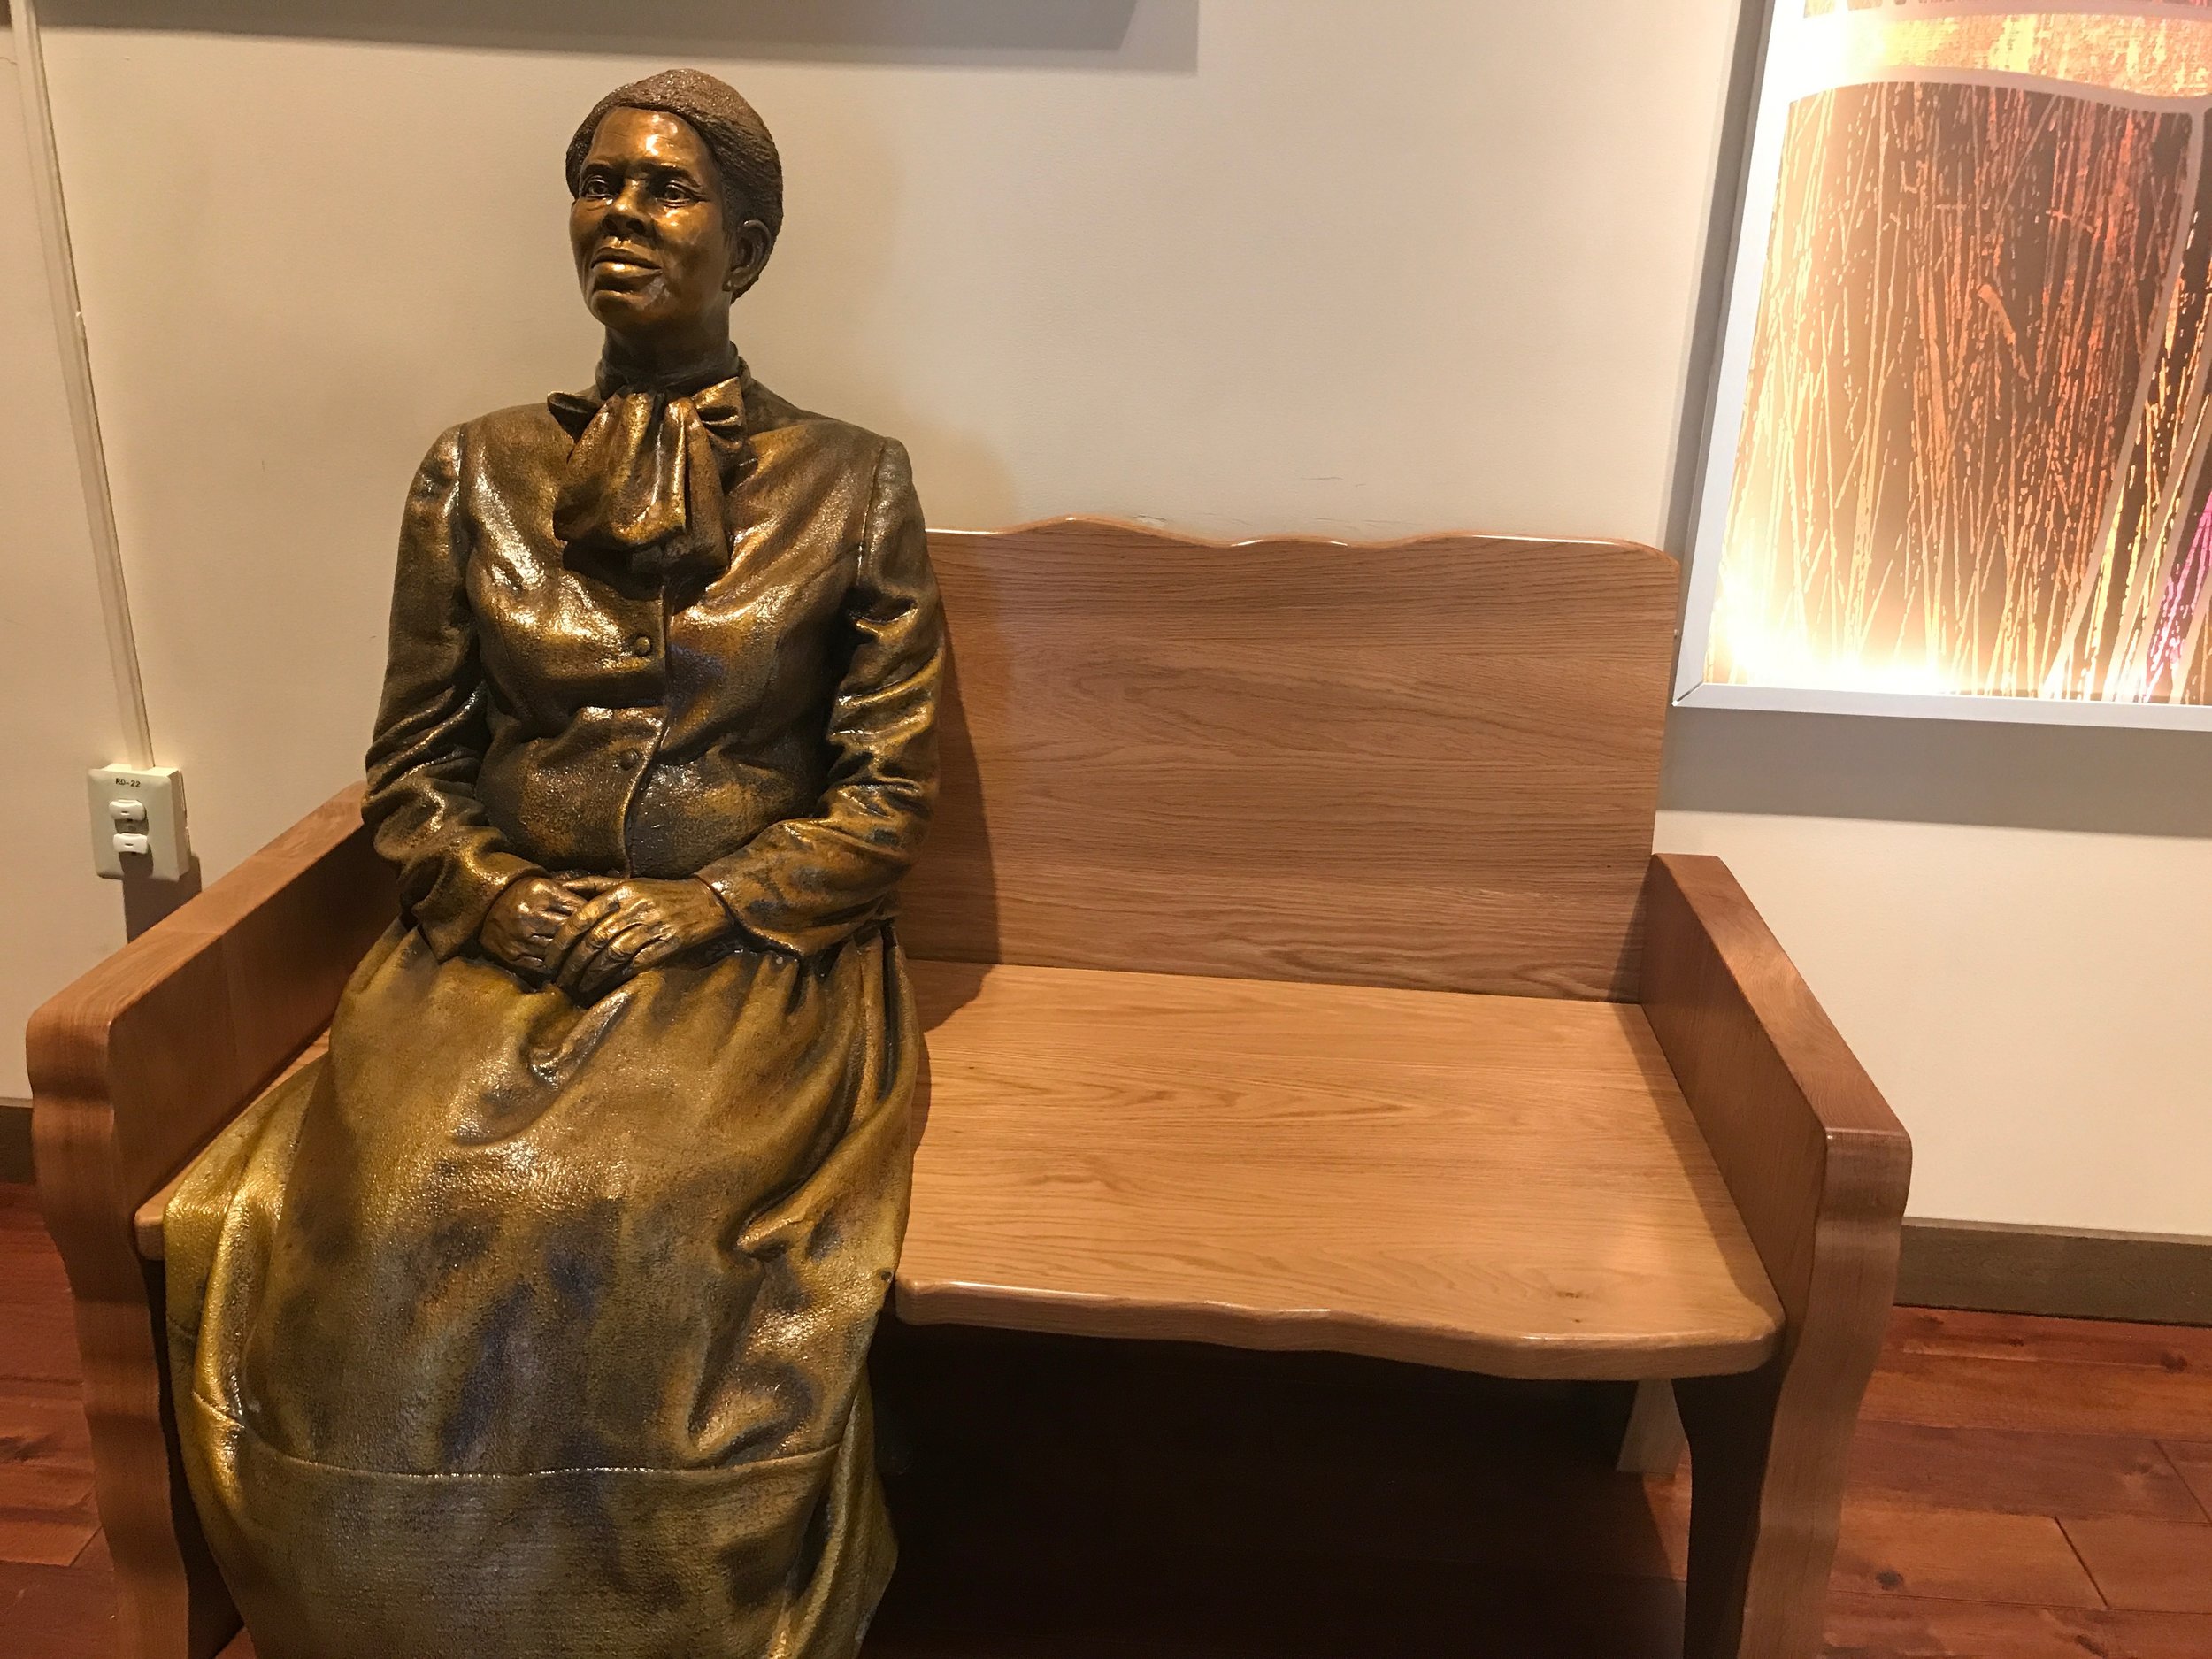  A statue of Harriet Tubman awaits company at the Harriet Tubman Underground Railroad National Historical Park in Cambridge, Md. 